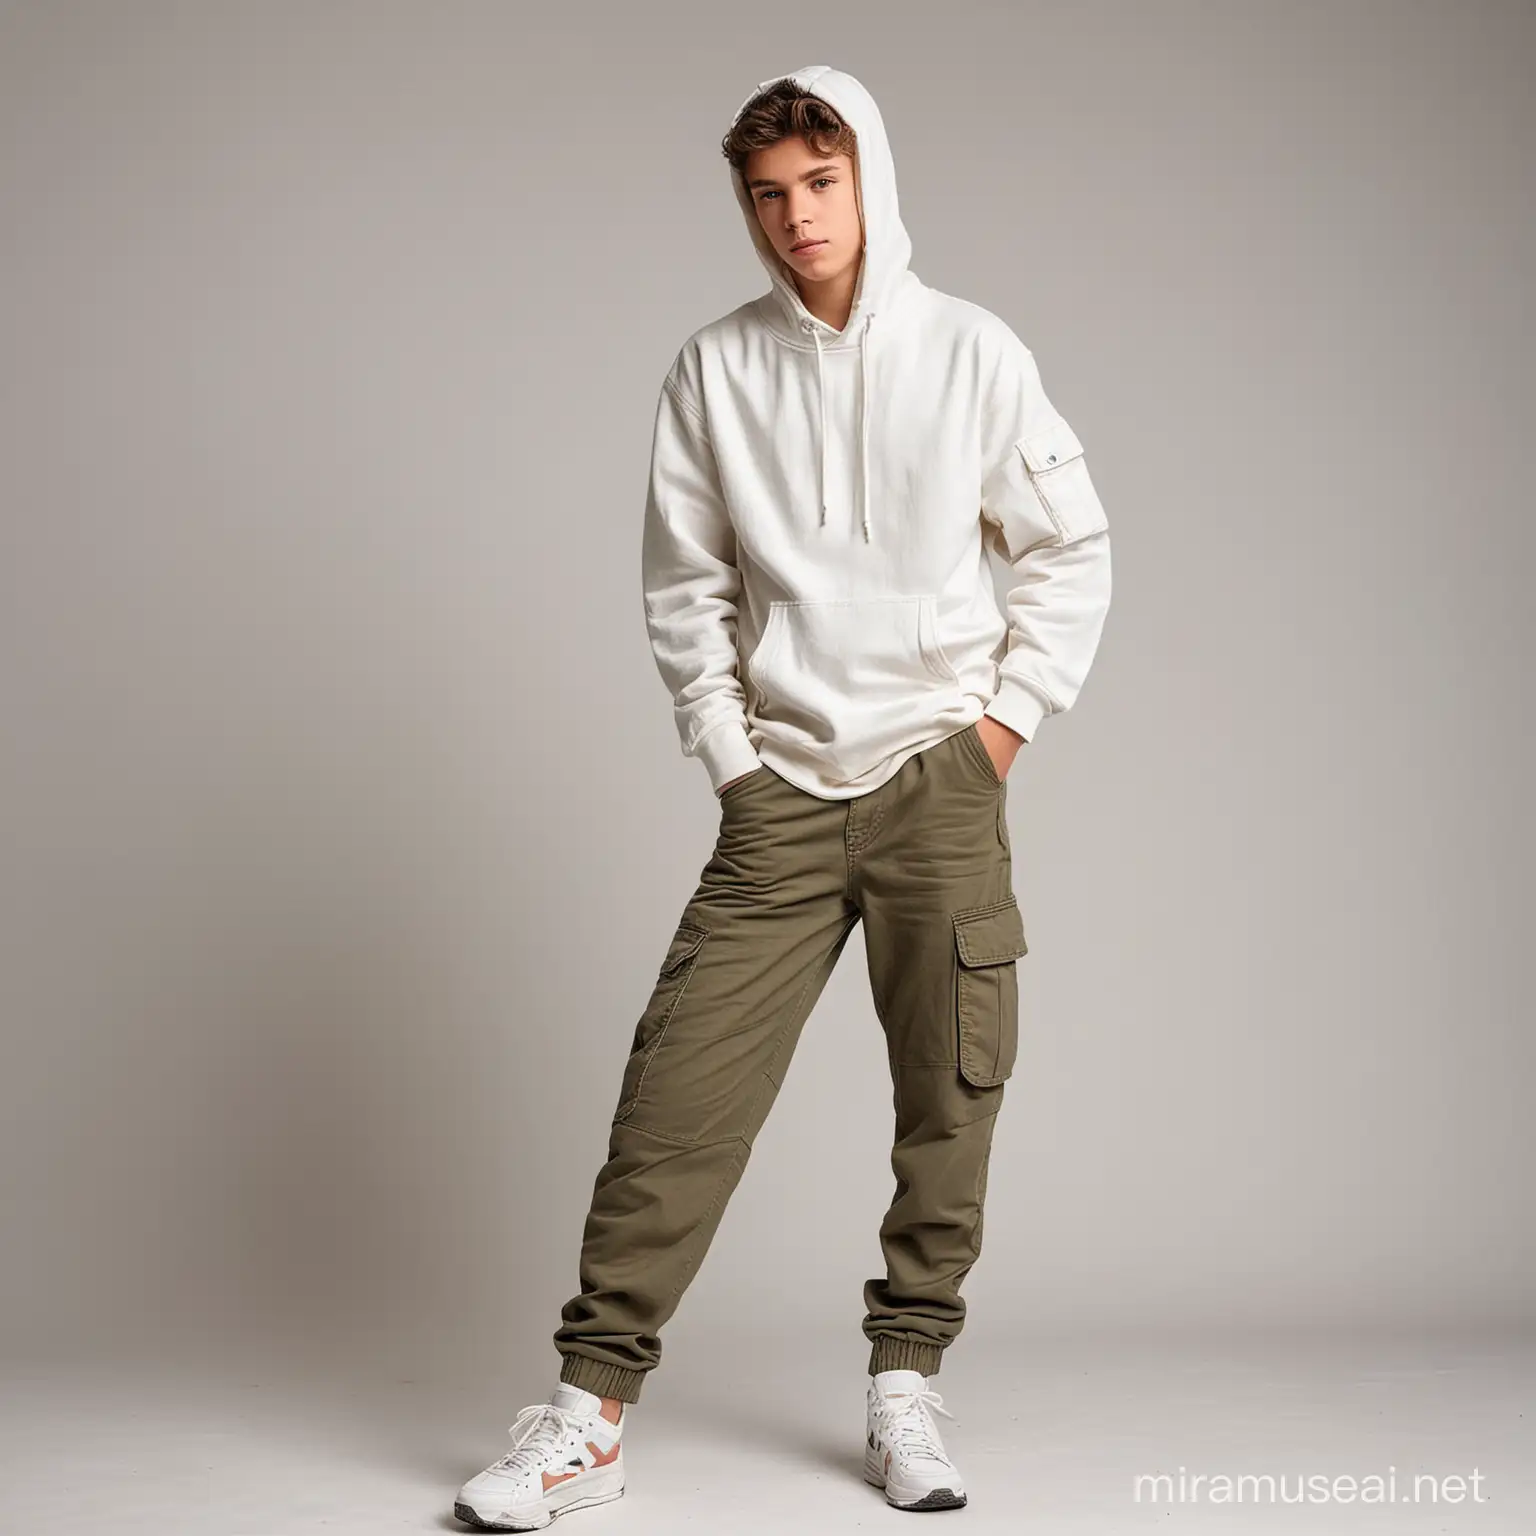 teenager boy, using a hoodie with classic fit, wearing cargo pants, photographic background white